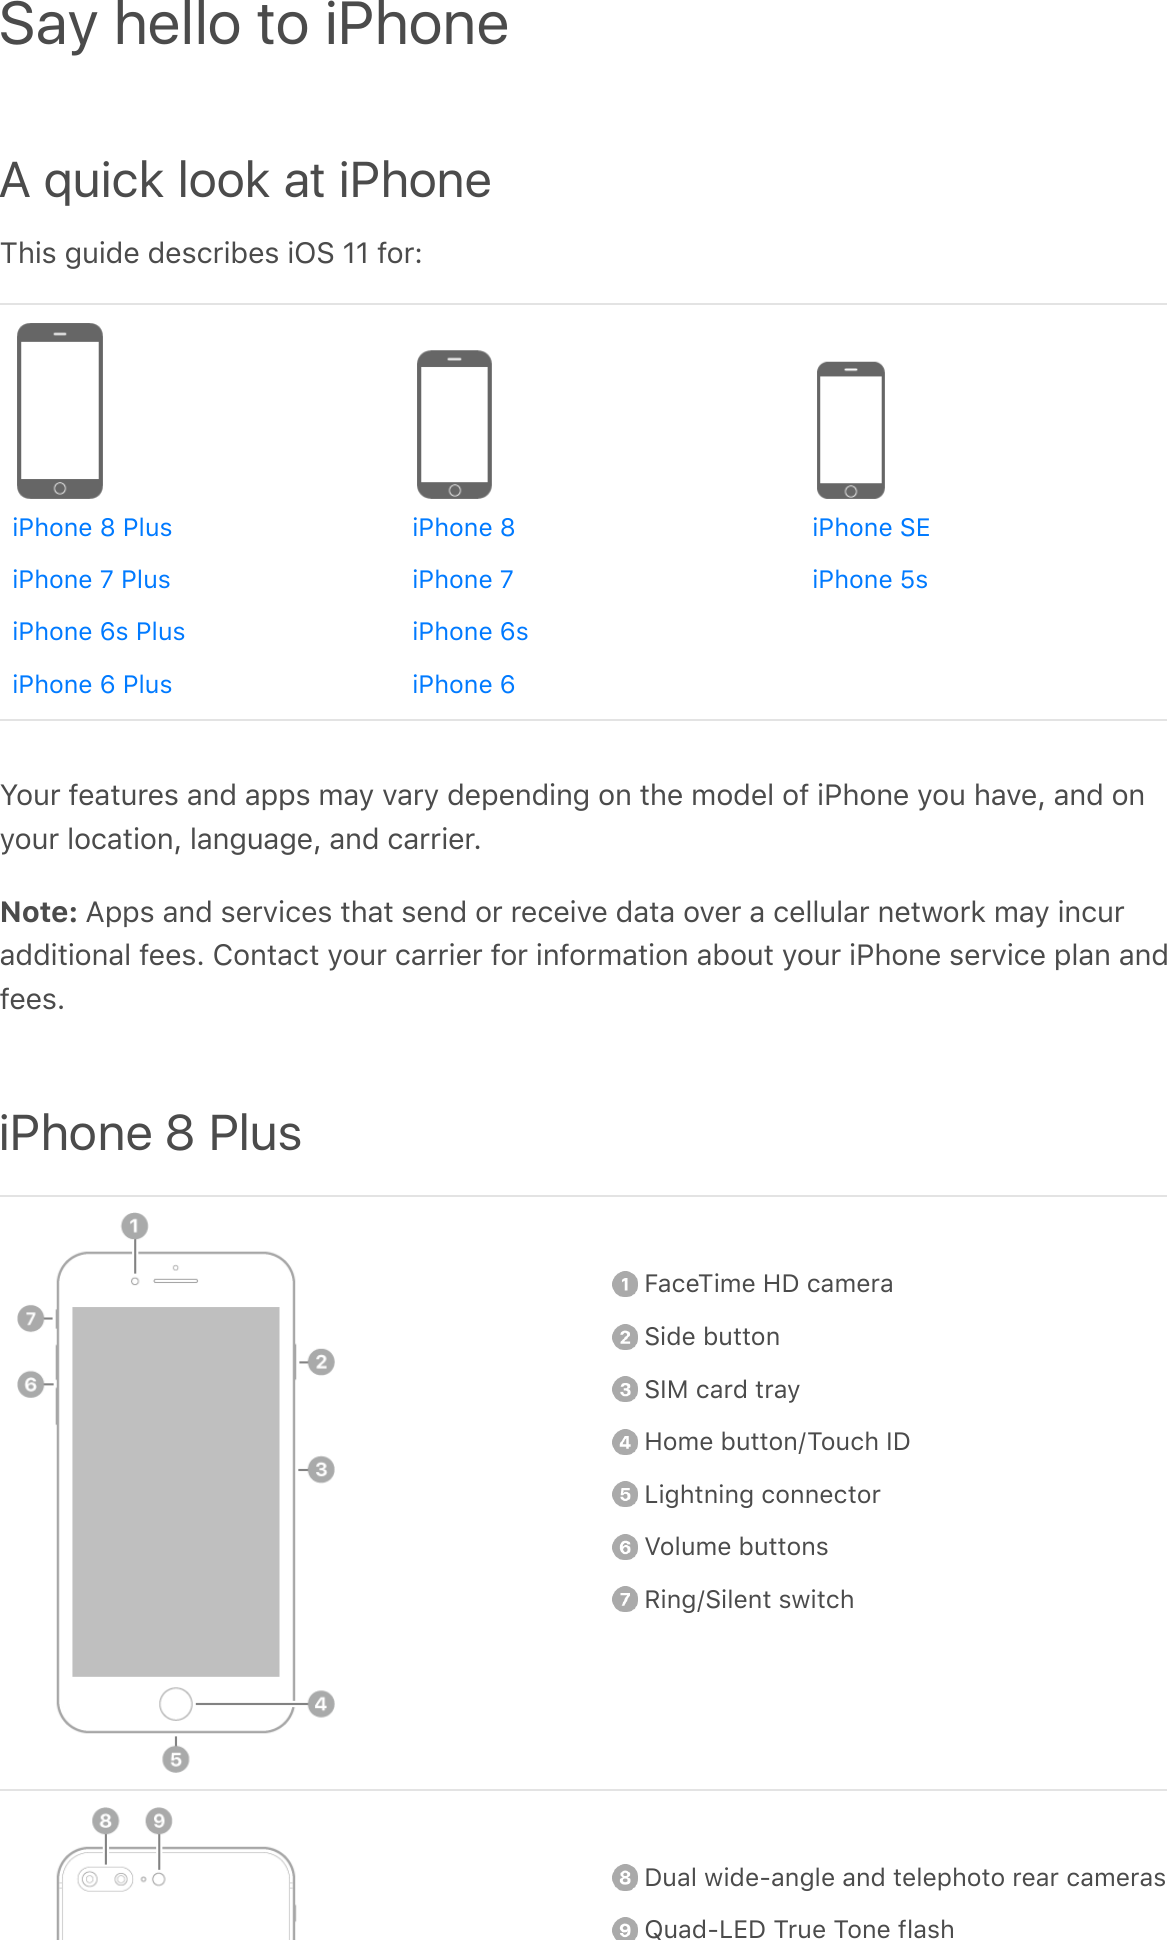 A quick look at iPhoneThis guide describes iOS 11 for:Your features and apps may vary depending on the model of iPhone you have, and onyour location, language, and carrier.Note: Apps and services that send or receive data over a cellular network may incuradditional fees. Contact your carrier for information about your iPhone service plan andfees.iPhone 8 Plus   FaceTime HD camera Side button SIM card tray Home button/Touch ID Lightning connector Volume buttons Ring/Silent switch   Dual wide-angle and telephoto rear cameras Quad-LED True Tone flashSay hello to iPhoneiPhone 8 PlusiPhone 7 PlusiPhone 6s PlusiPhone 6 PlusiPhone 8iPhone 7iPhone 6siPhone 6iPhone SEiPhone 5s